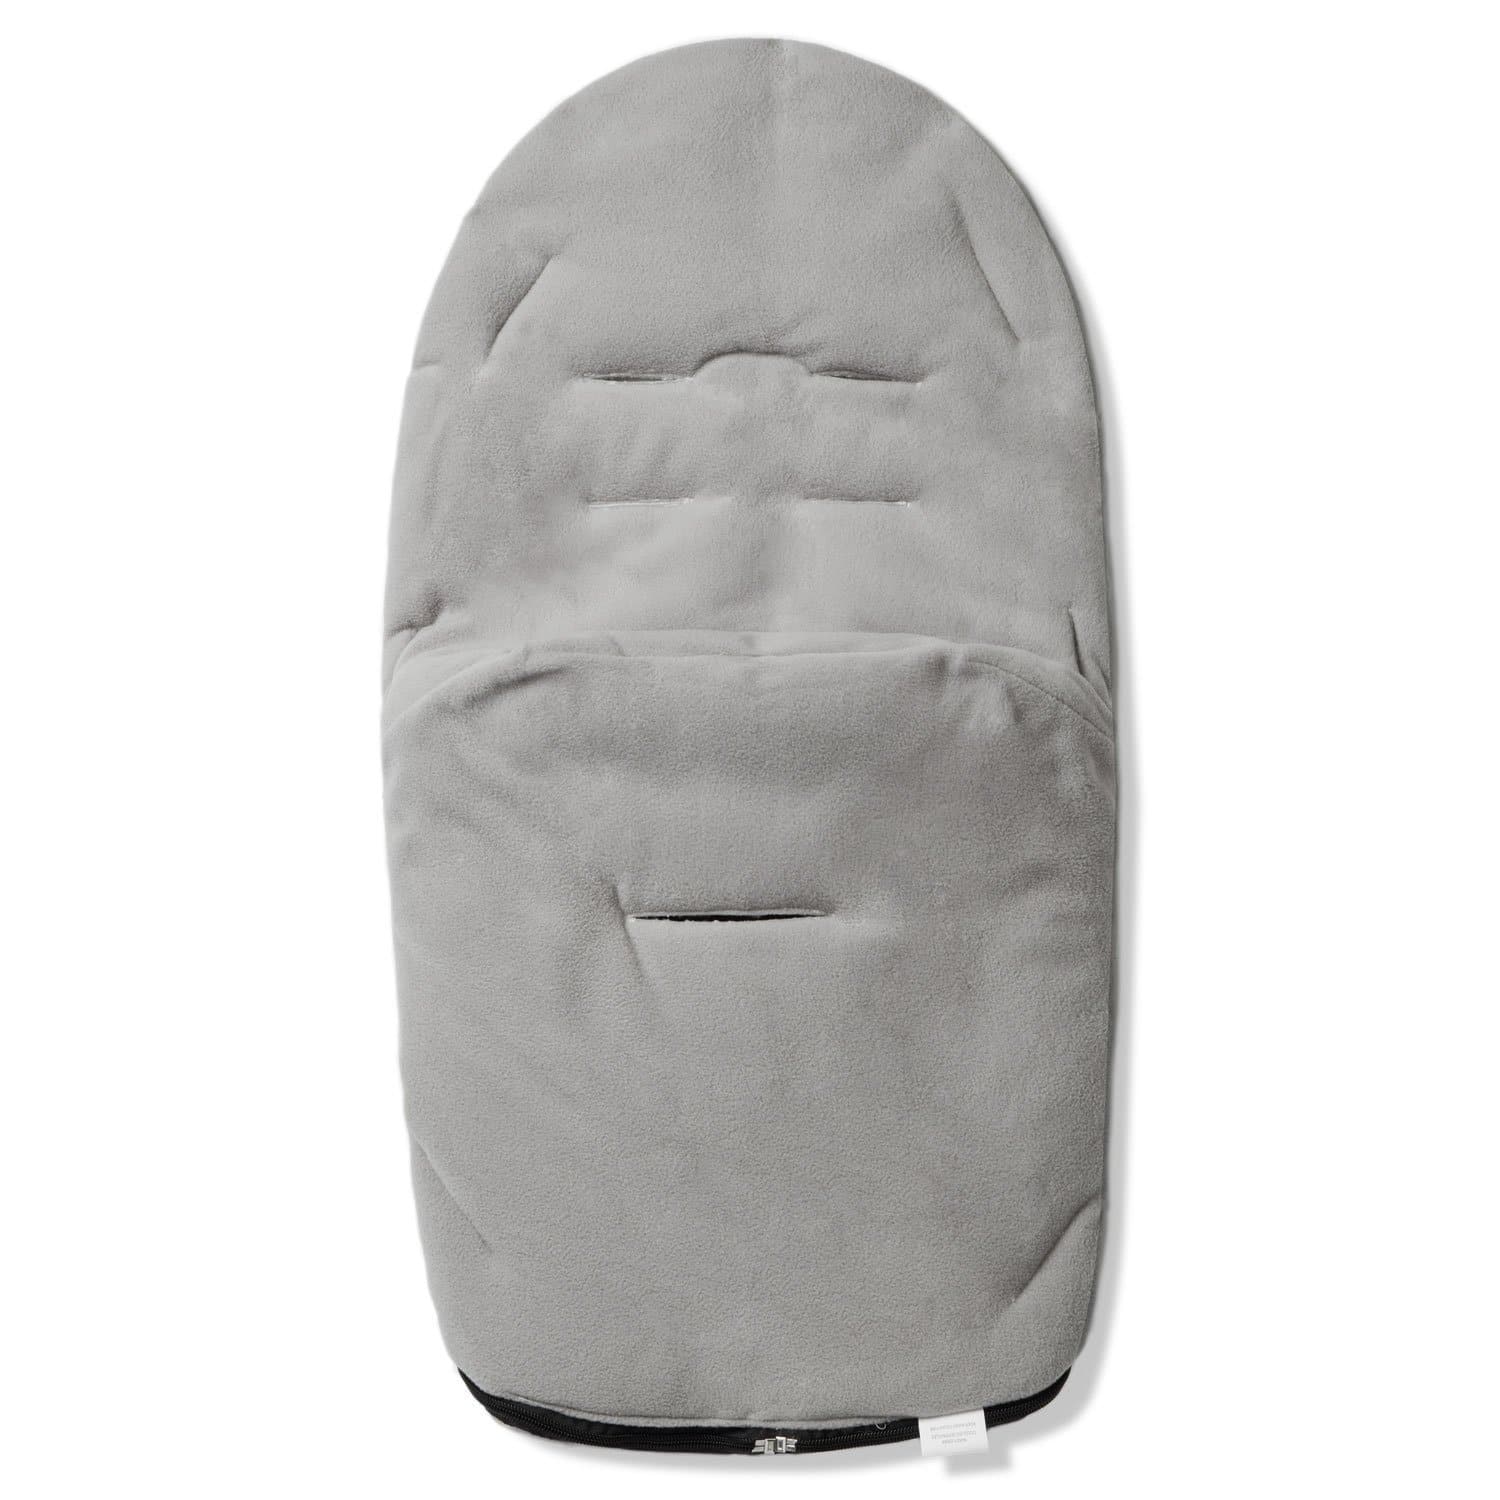 Dimple Car Seat Footmuff / Cosy Toes Compatible with Jane - For Your Little One